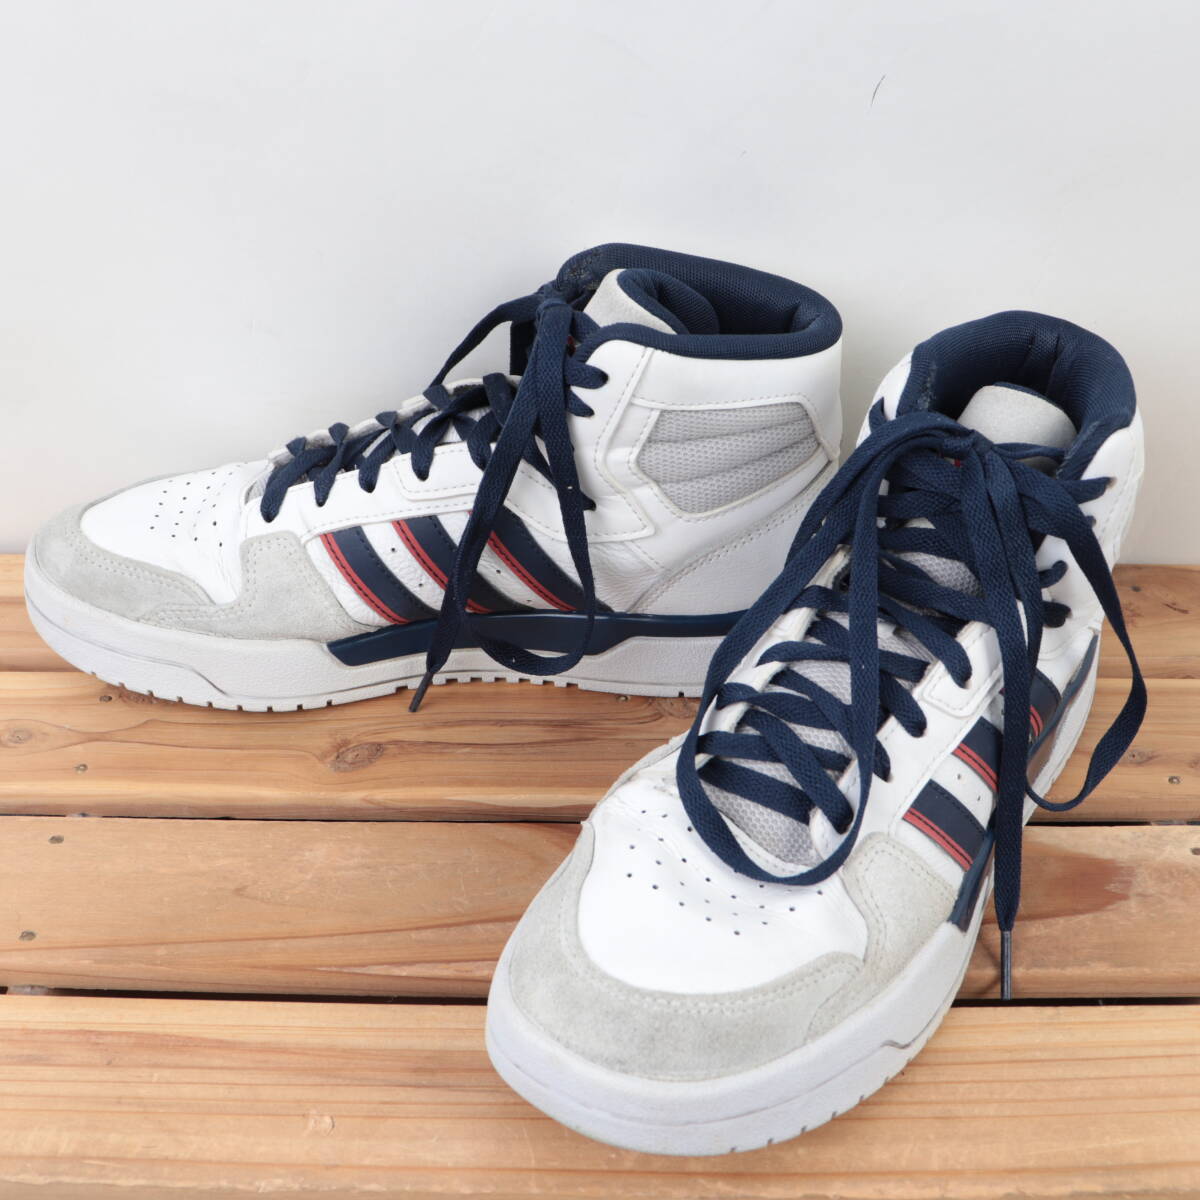 z910 Adidas en trap mid US8 1/2 26.5cm/ white white navy blue red light gray adidas ENTRAP MID men's sneakers used 